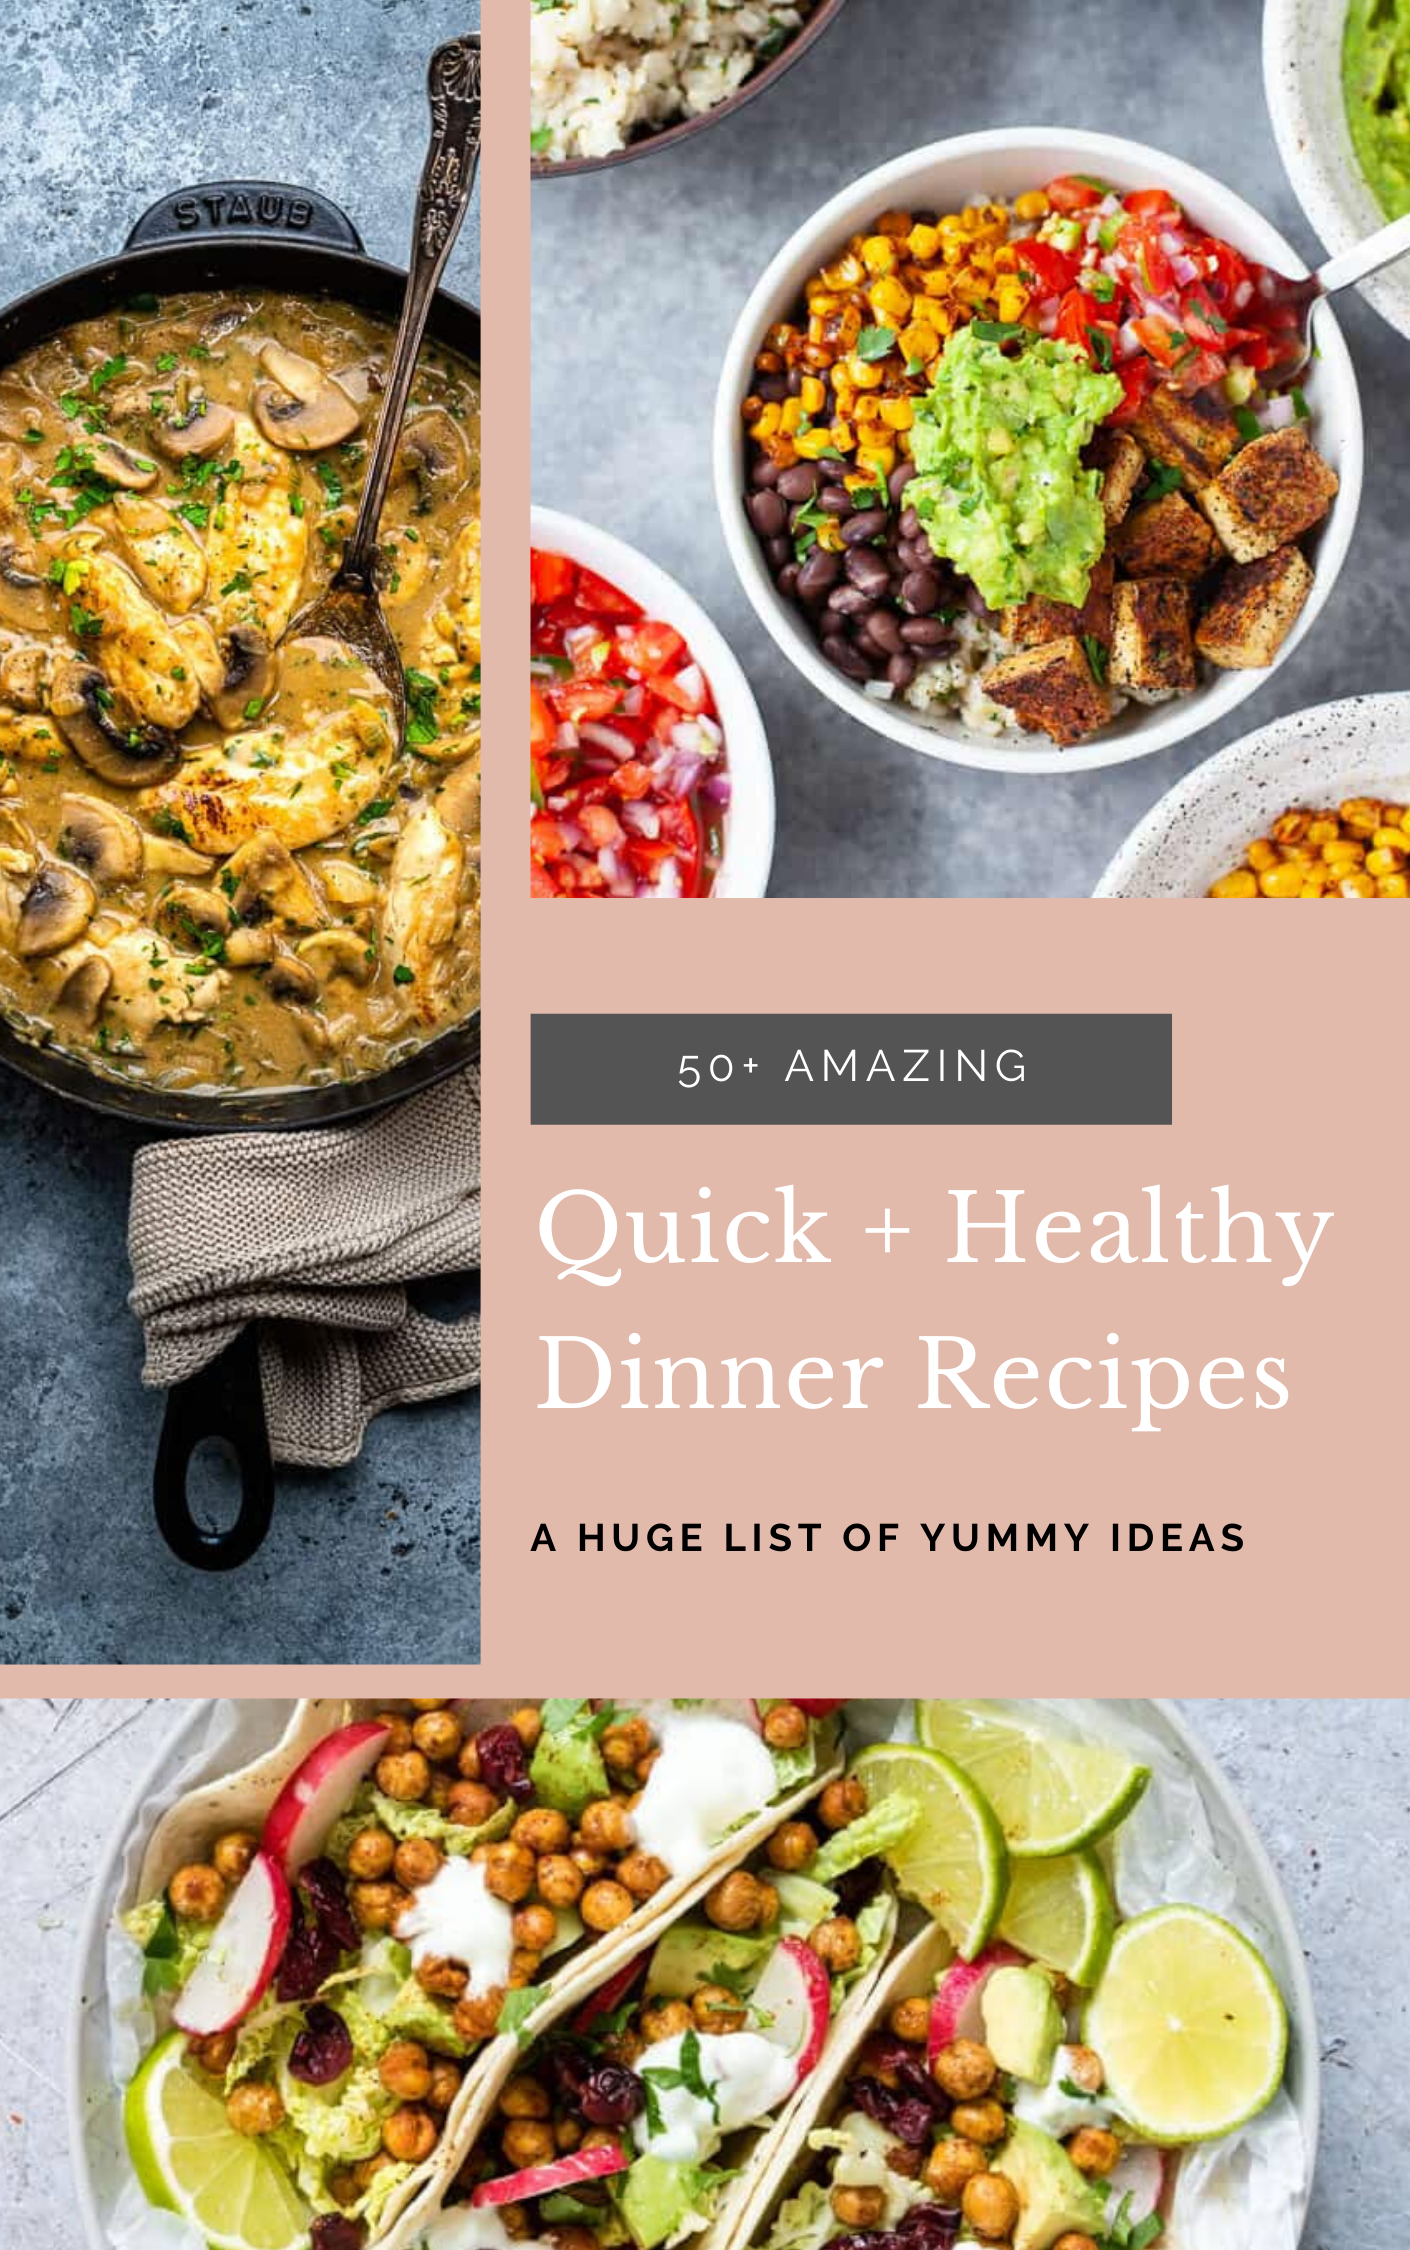 50+ Quick and Healthy Dinner Recipes Roundup